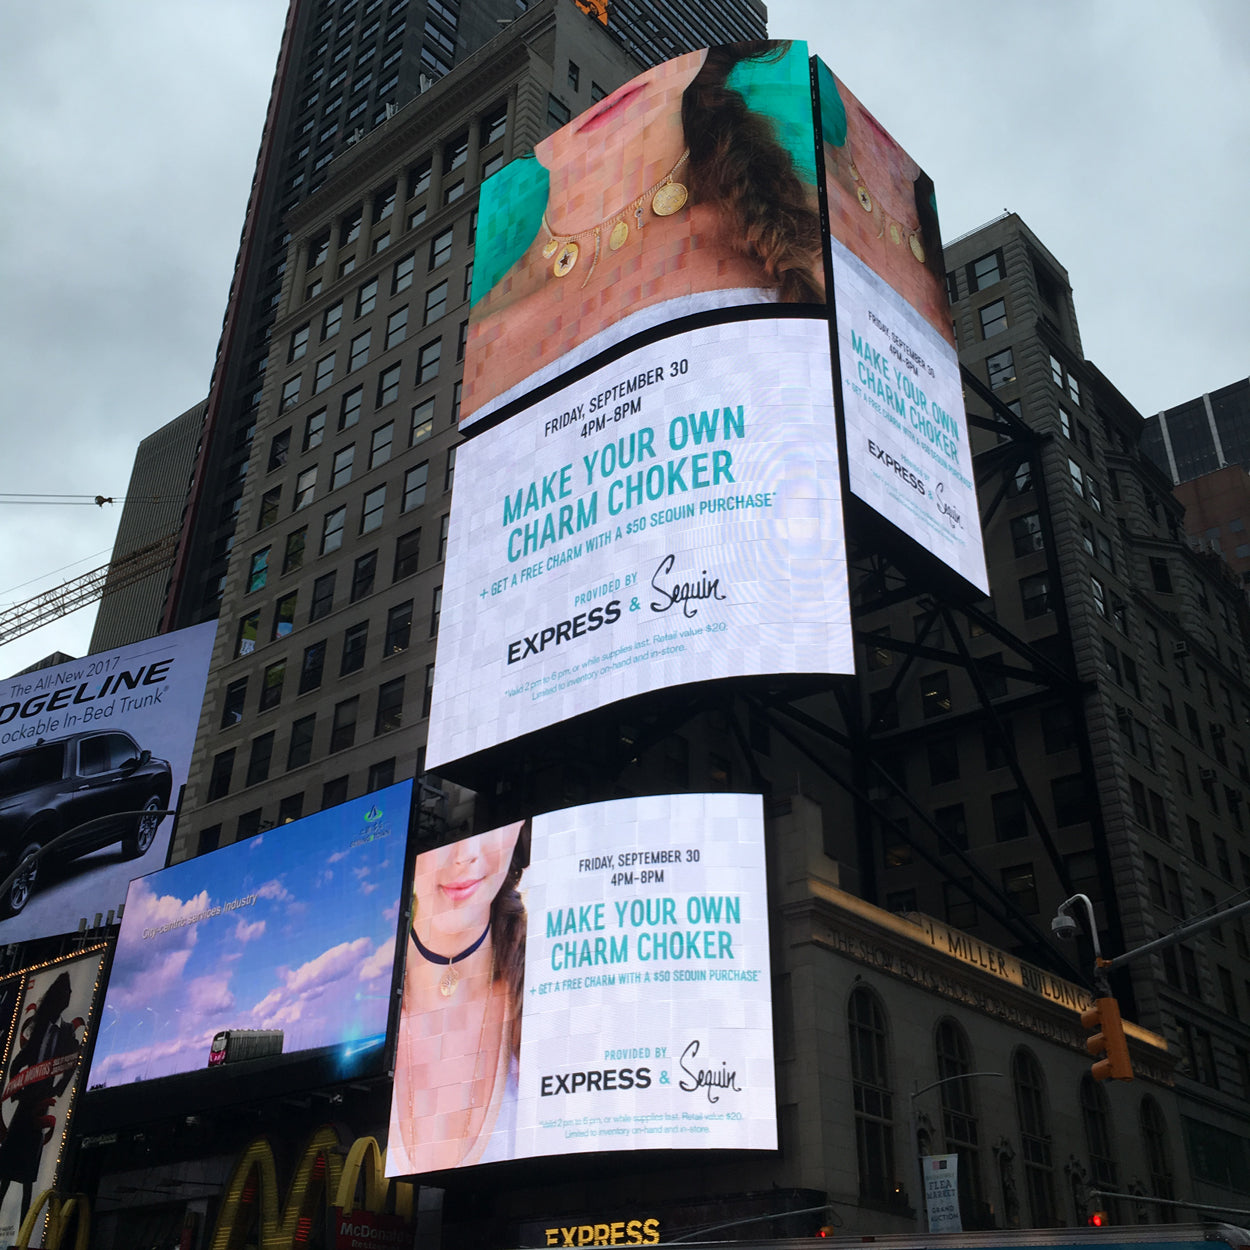 Sequin Featured in Times Square for Express trunk show event!